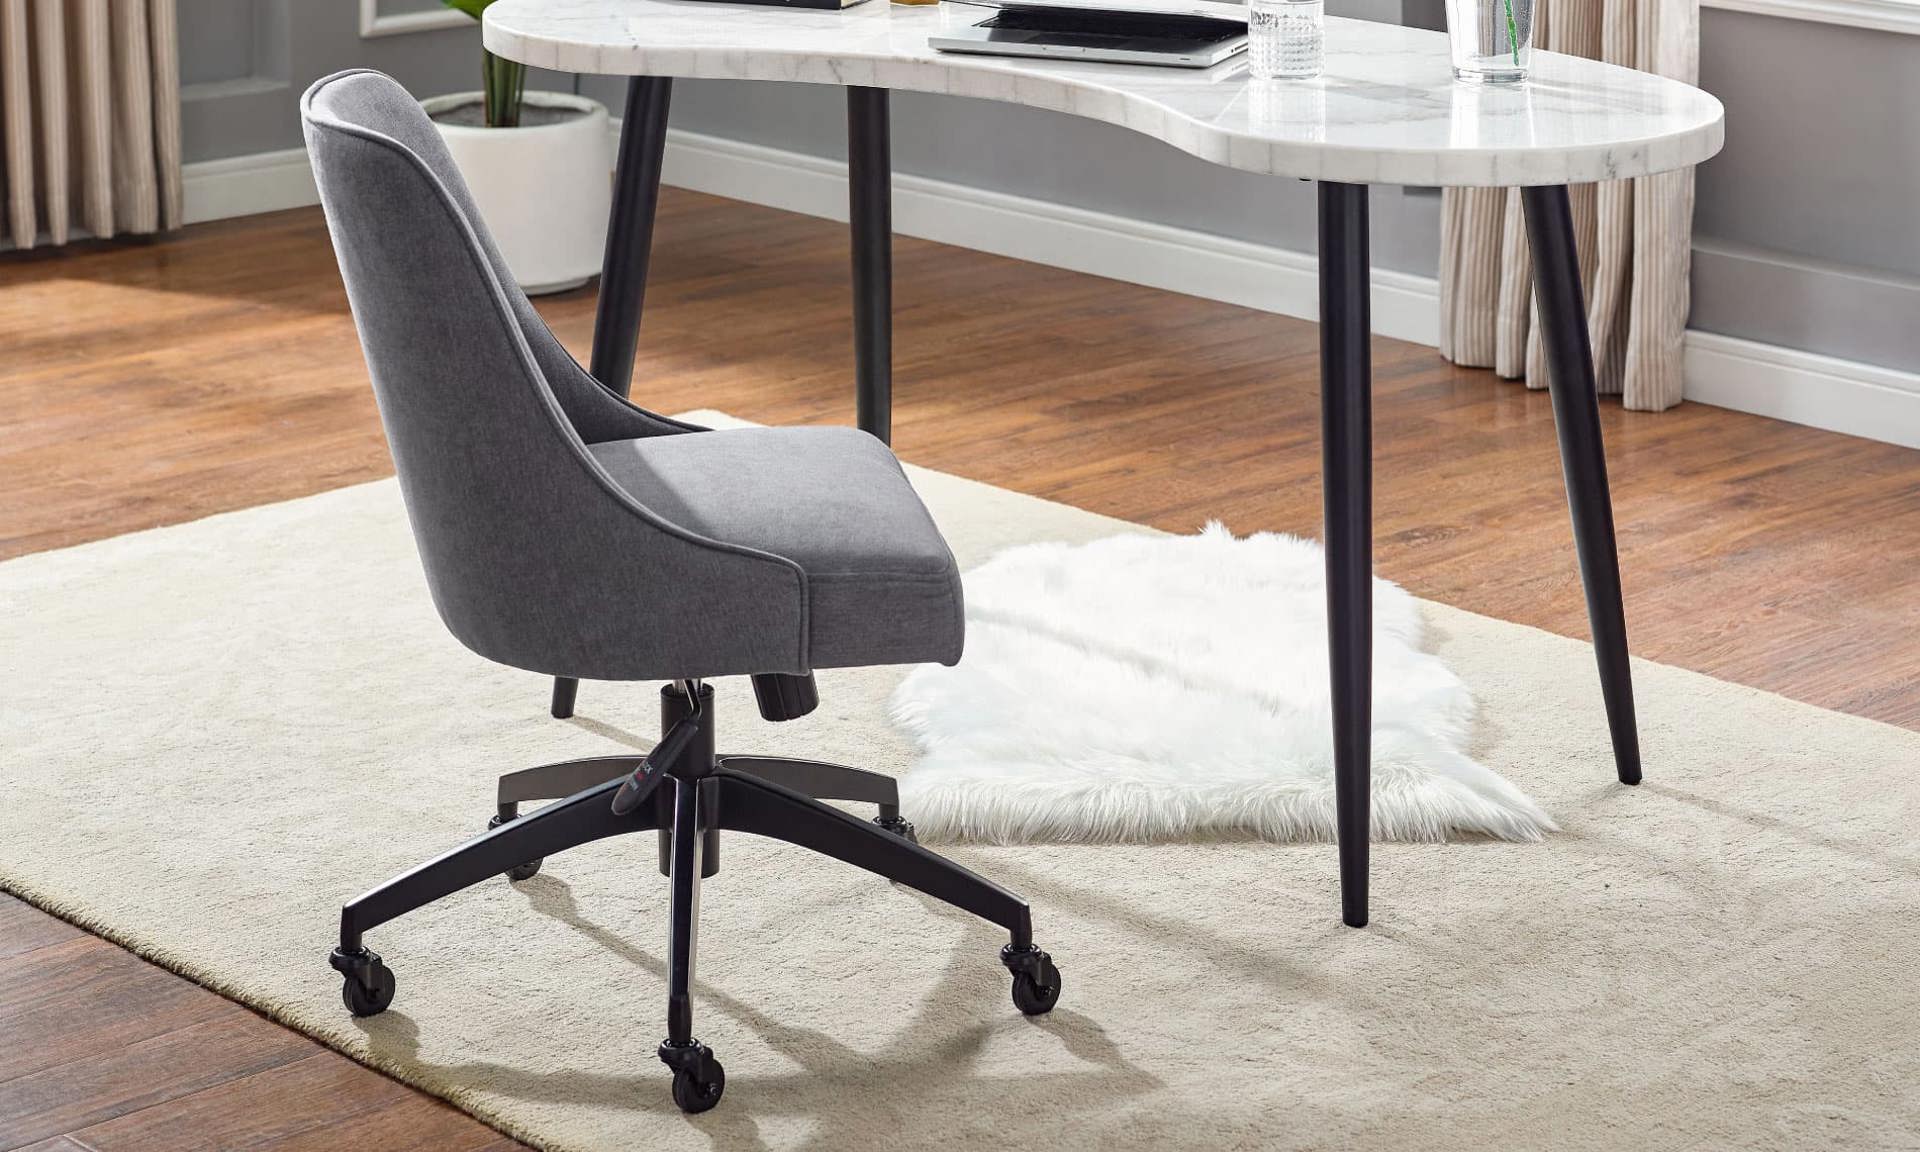 Office chairs to update your home office.